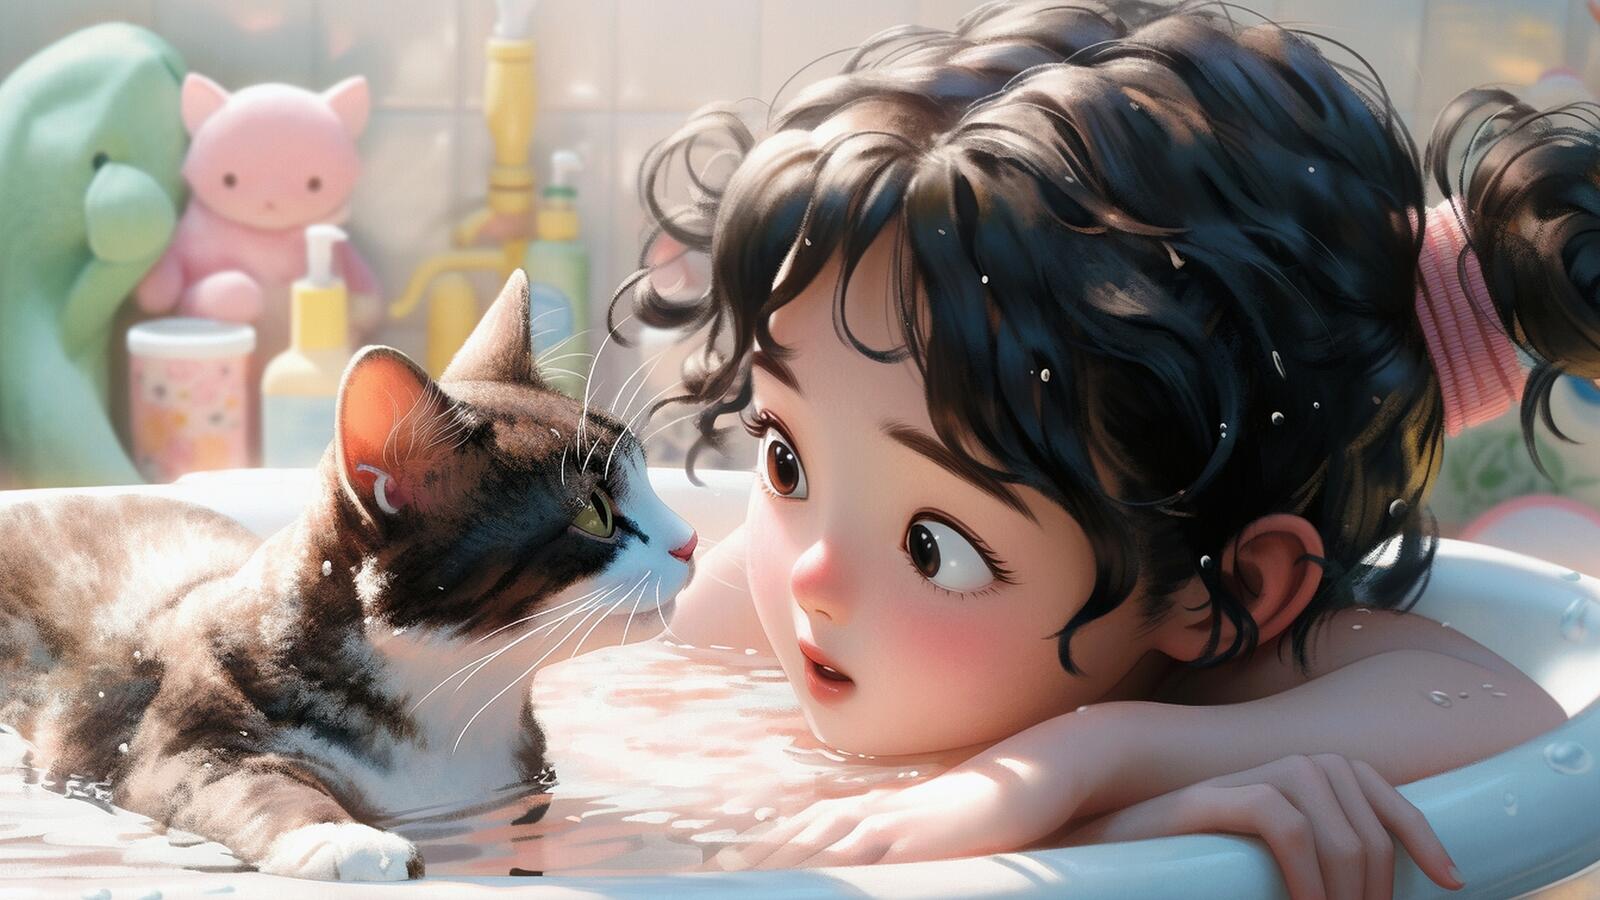 Free photo A drawing of a girl and a cat in a bathtub